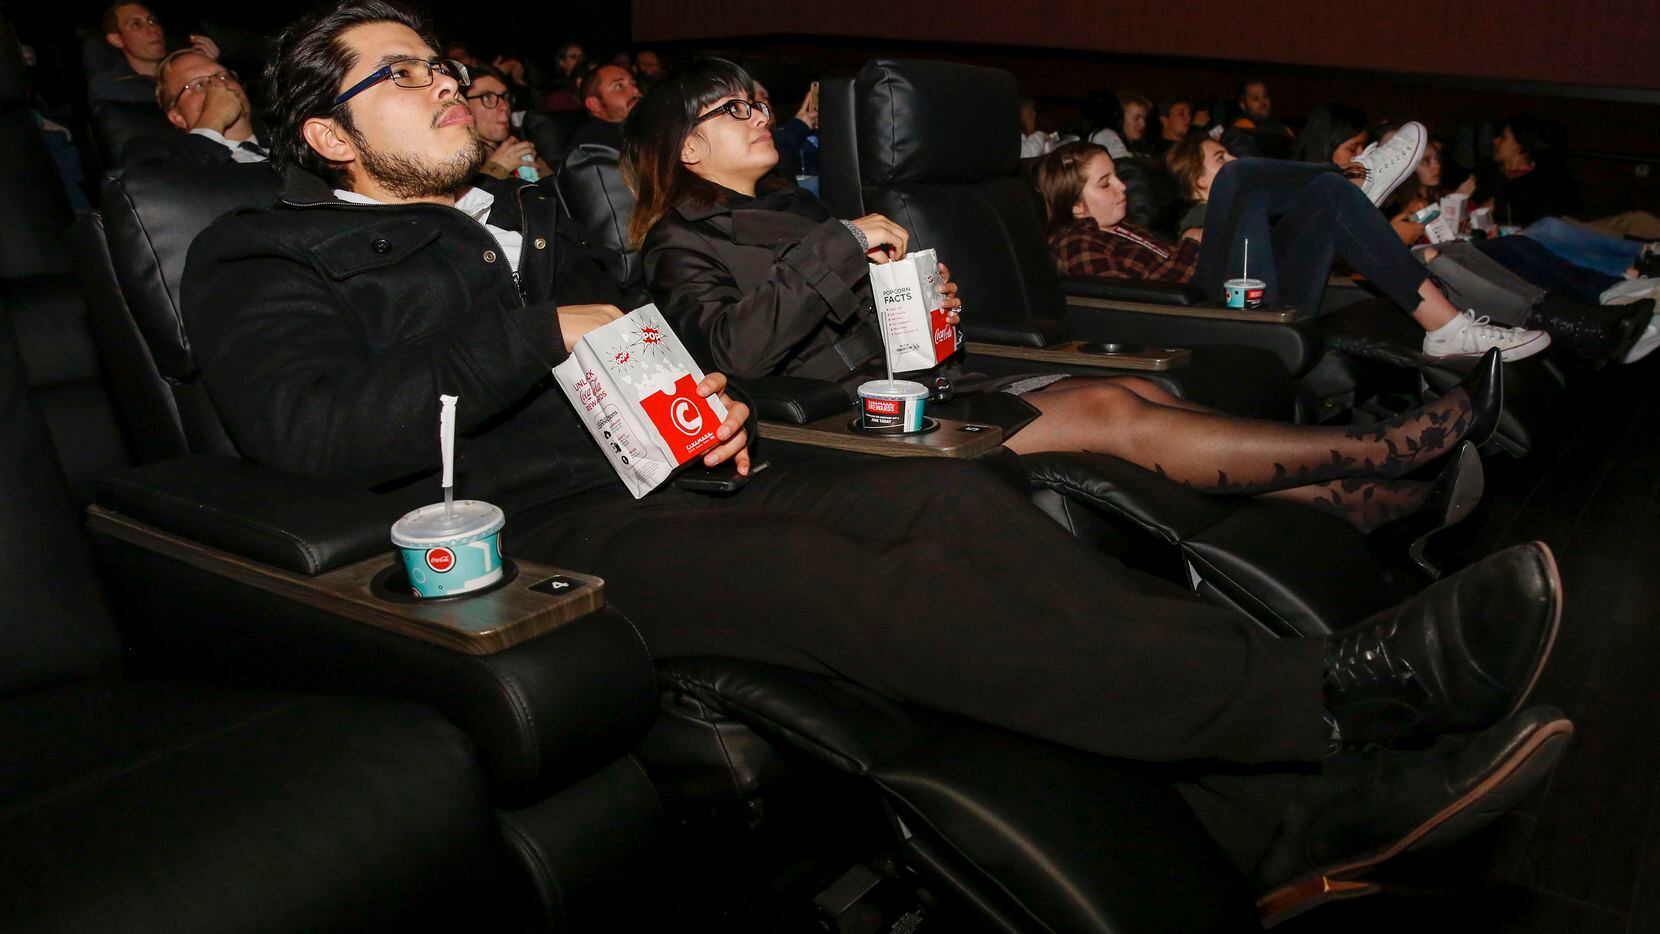 Gustavo Alvarado and Gemma Ortega recline in their seats at a party before the opening of the remodeled Cinemark movie theater in central Plano. For the first time in 25 years, this theater has recliners.